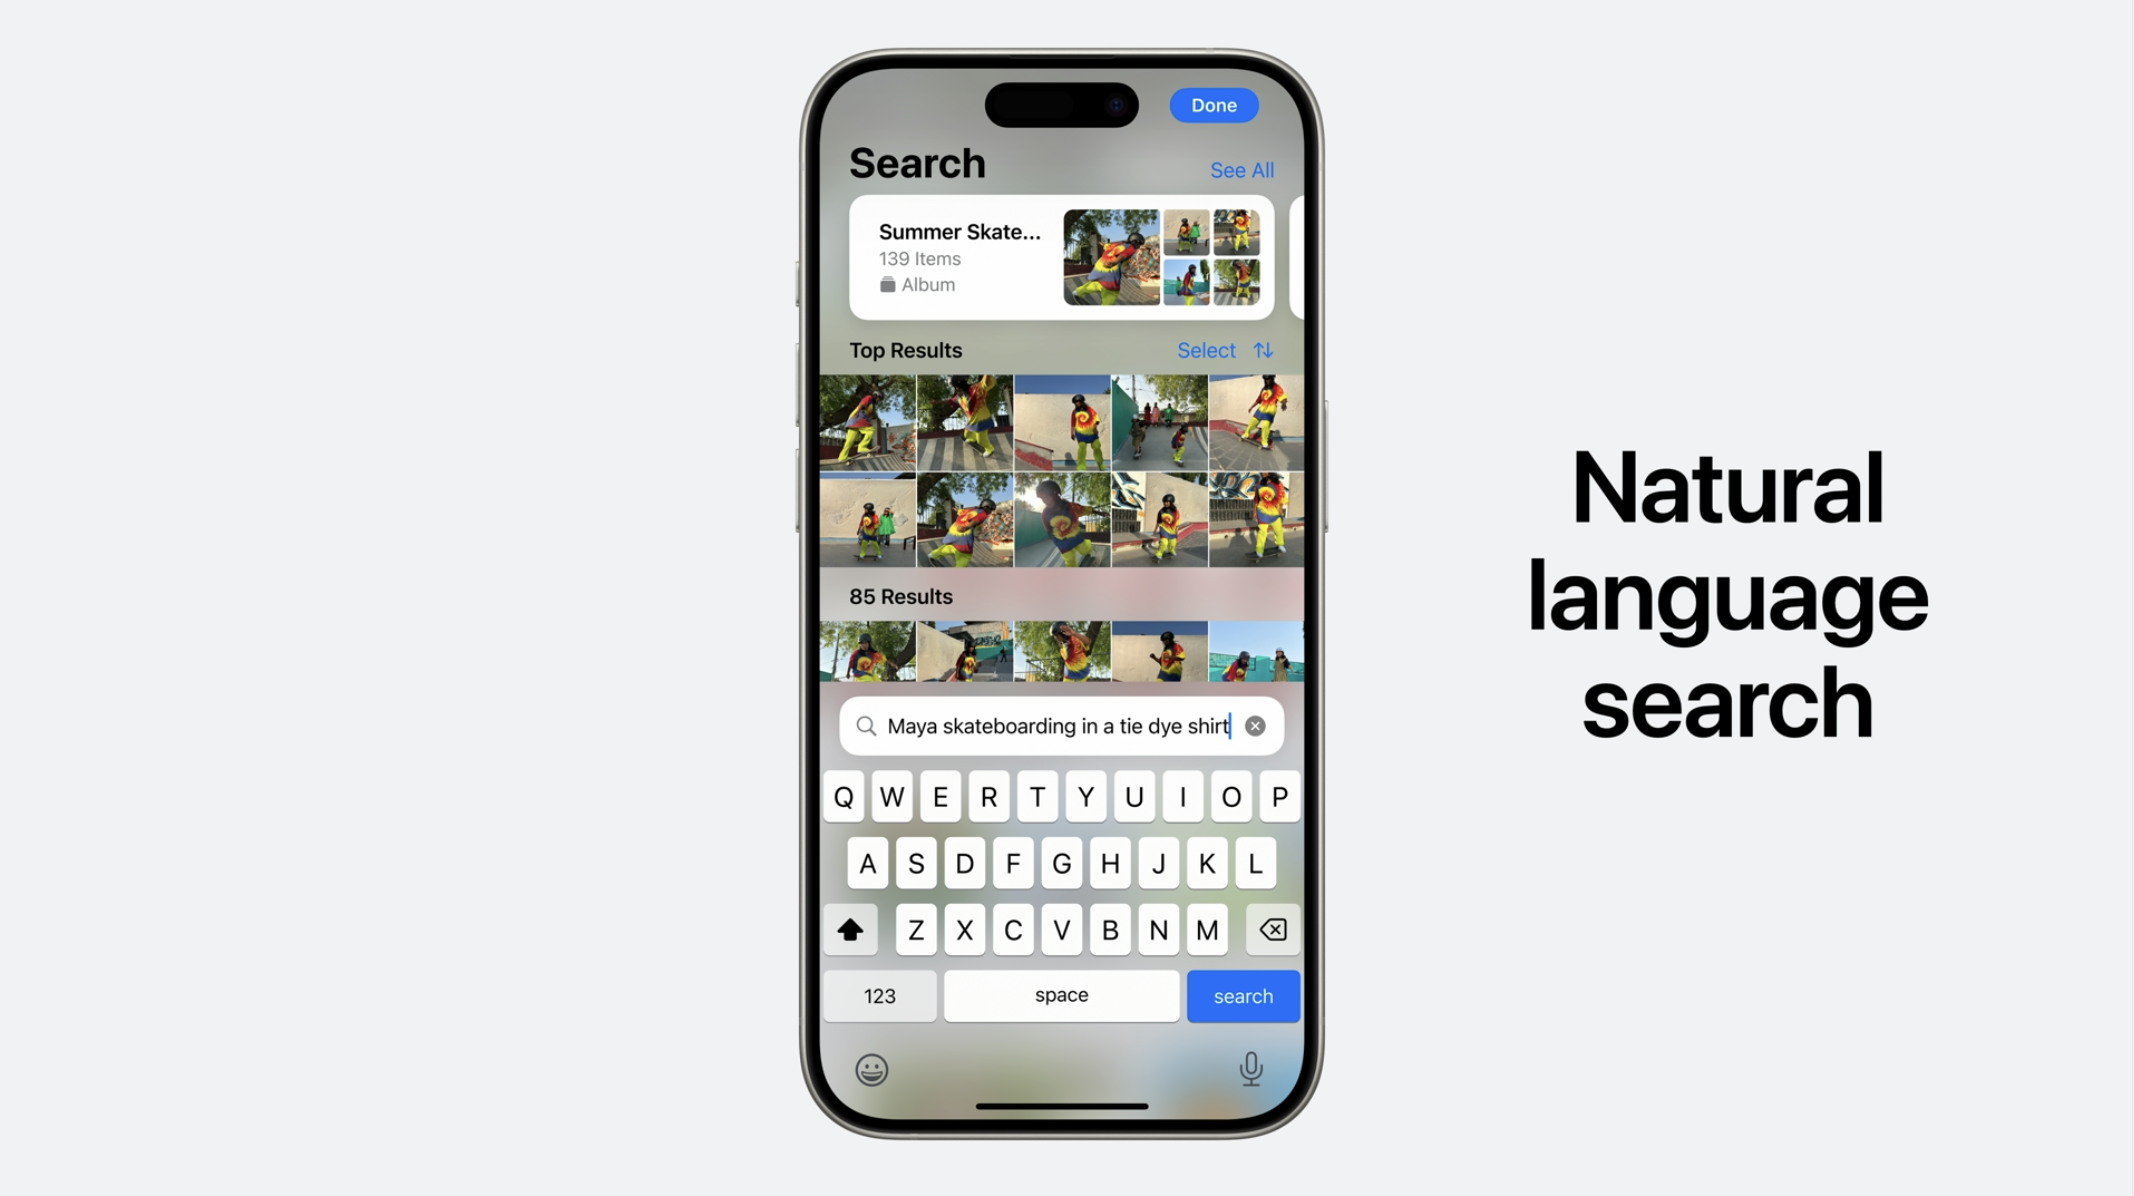 Natural language search coming to the Photos app.